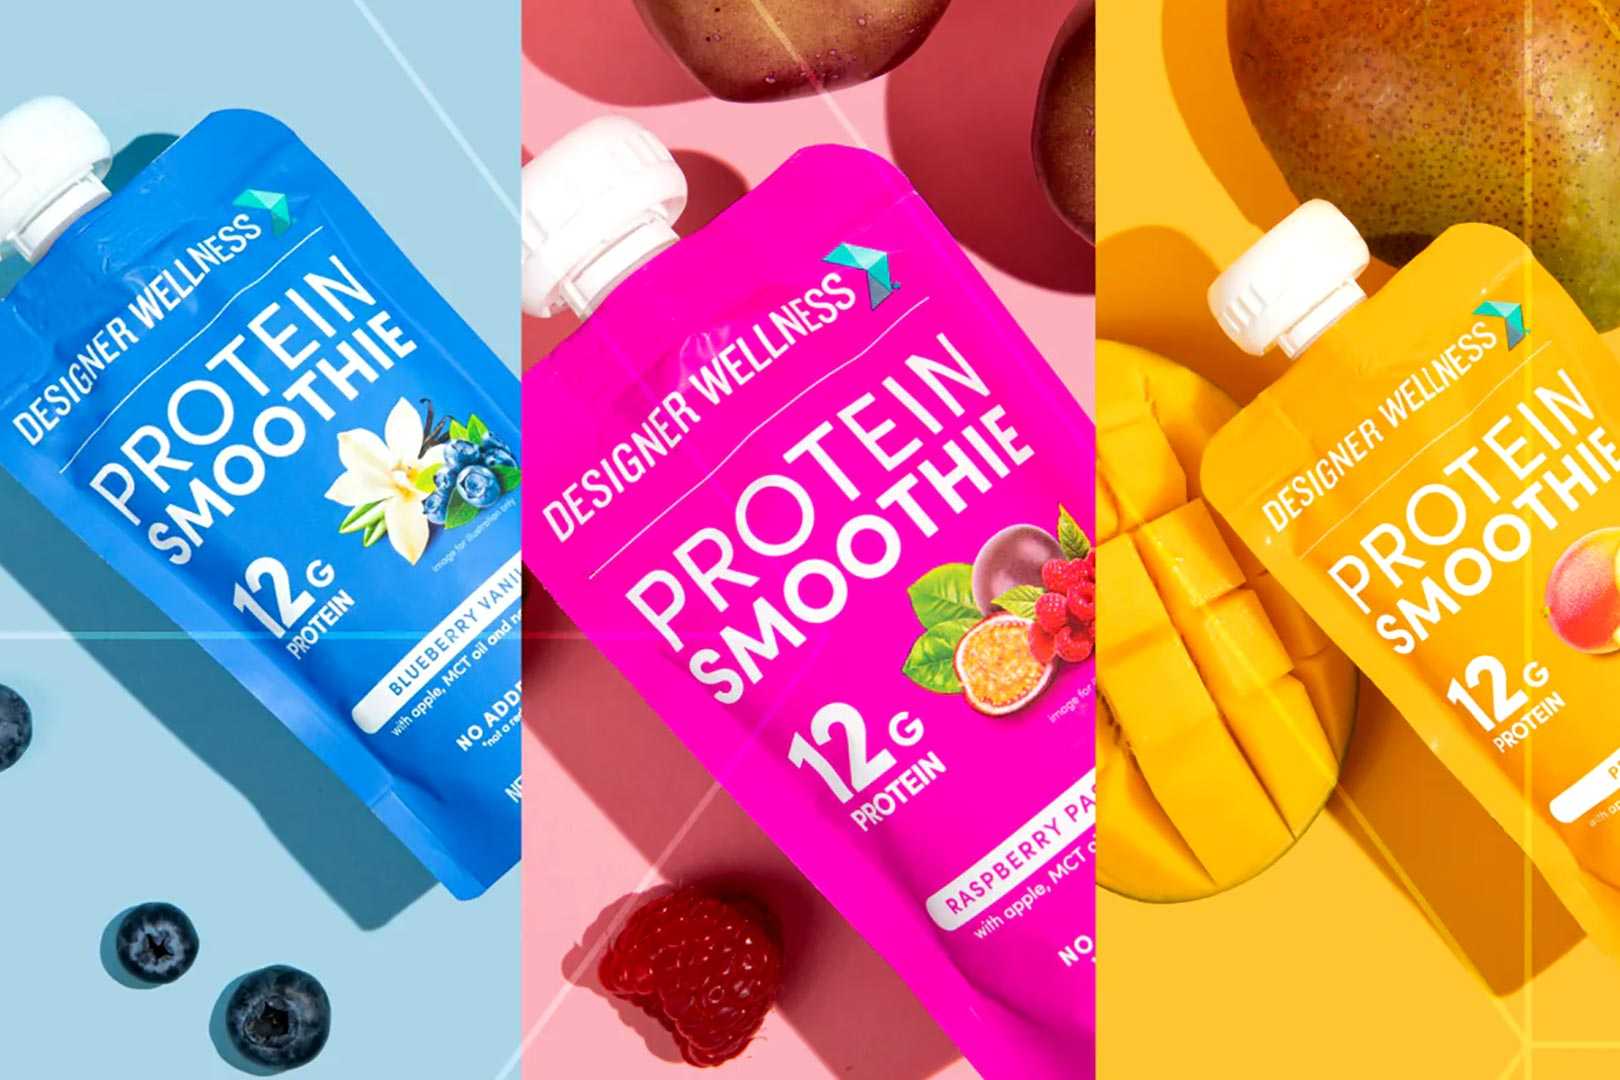 Designer Doubles Protein Smoothie Lineup